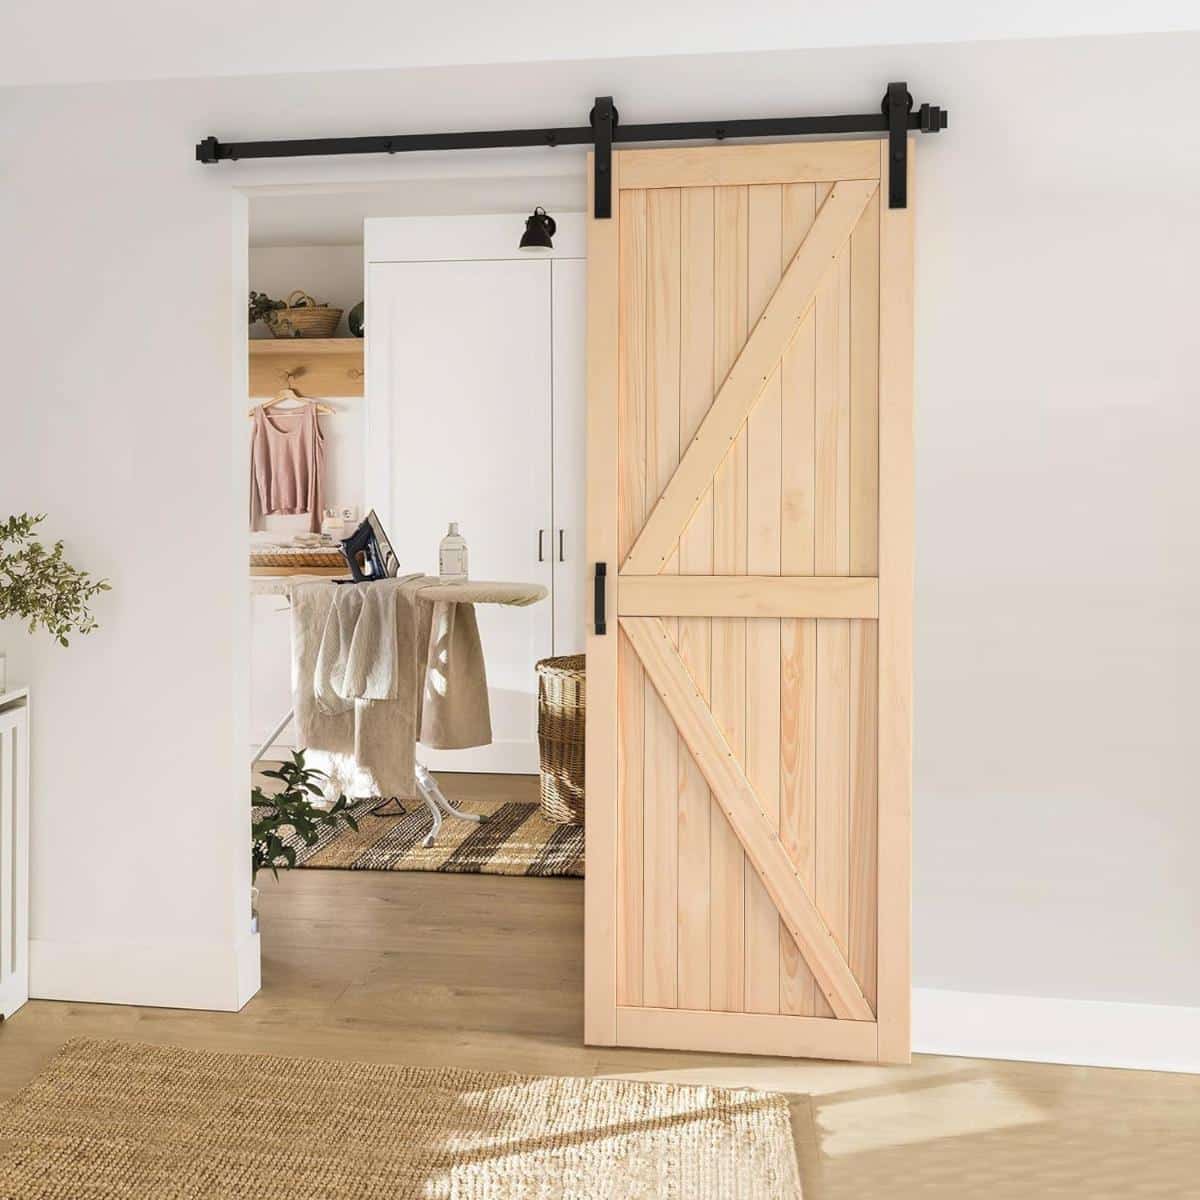 Sliding Barn Door With Pre-Drilled Holes